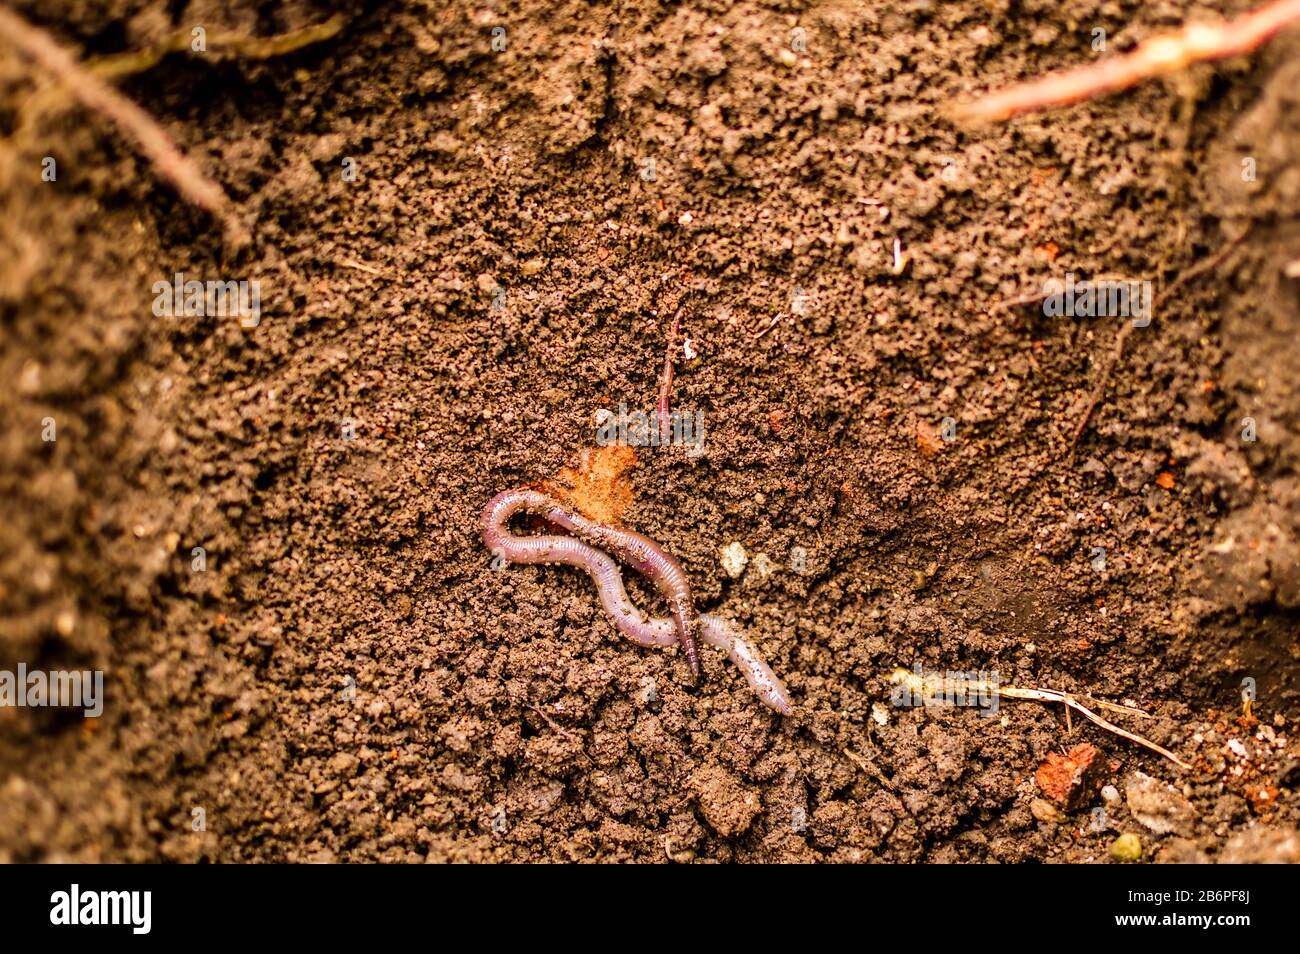 A worm begins to burrow into the ground, a close-up of an earthworm in natural conditions Stock Photo